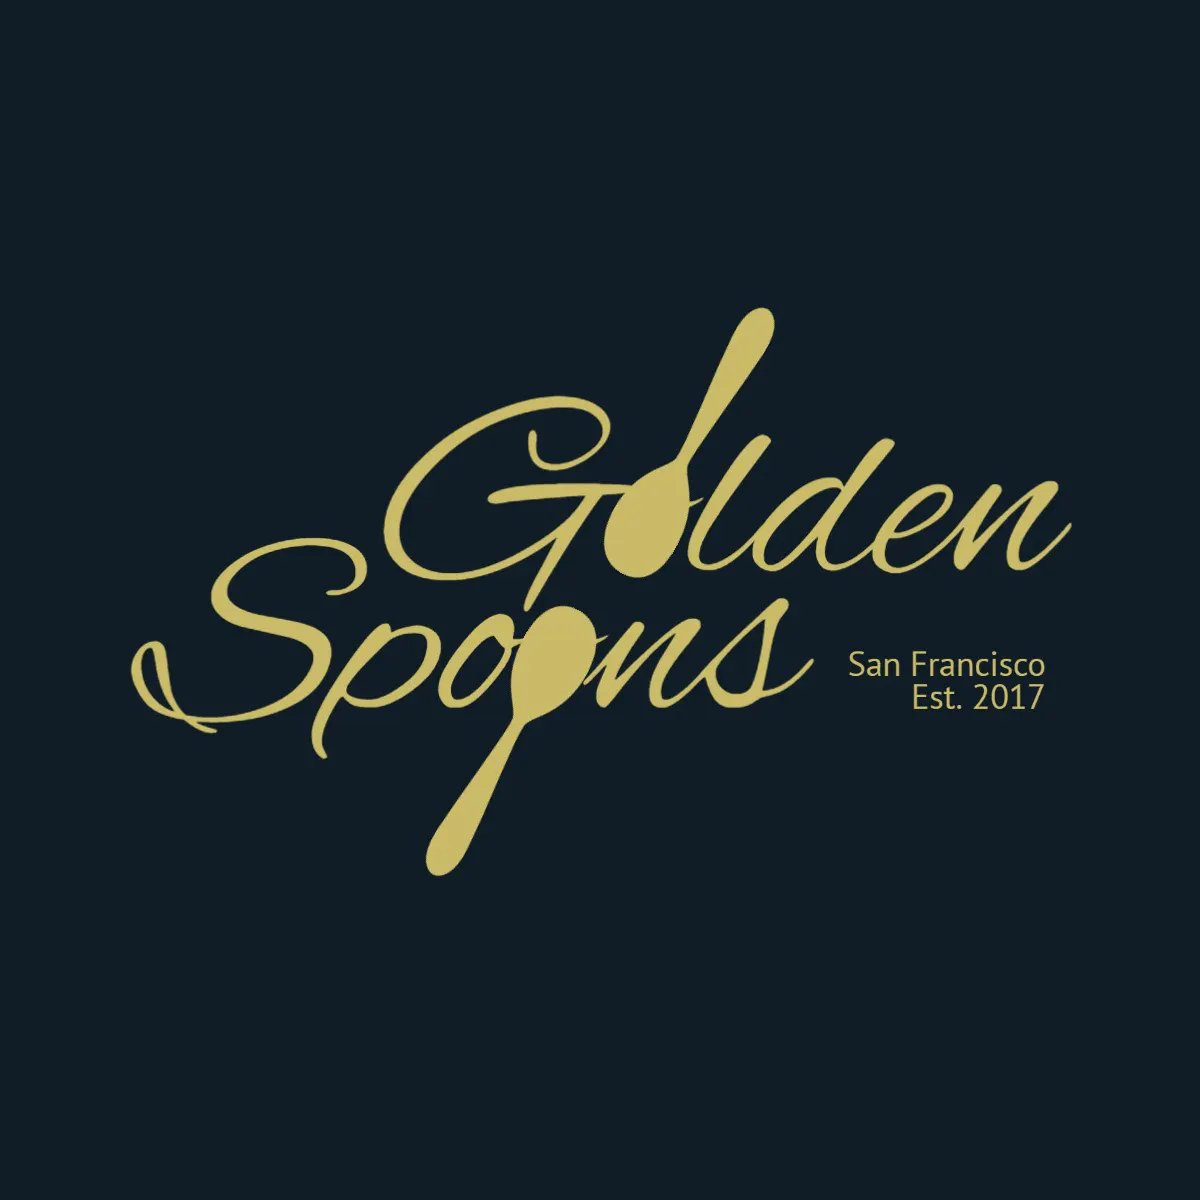 Green and gold spoon restaurant logo